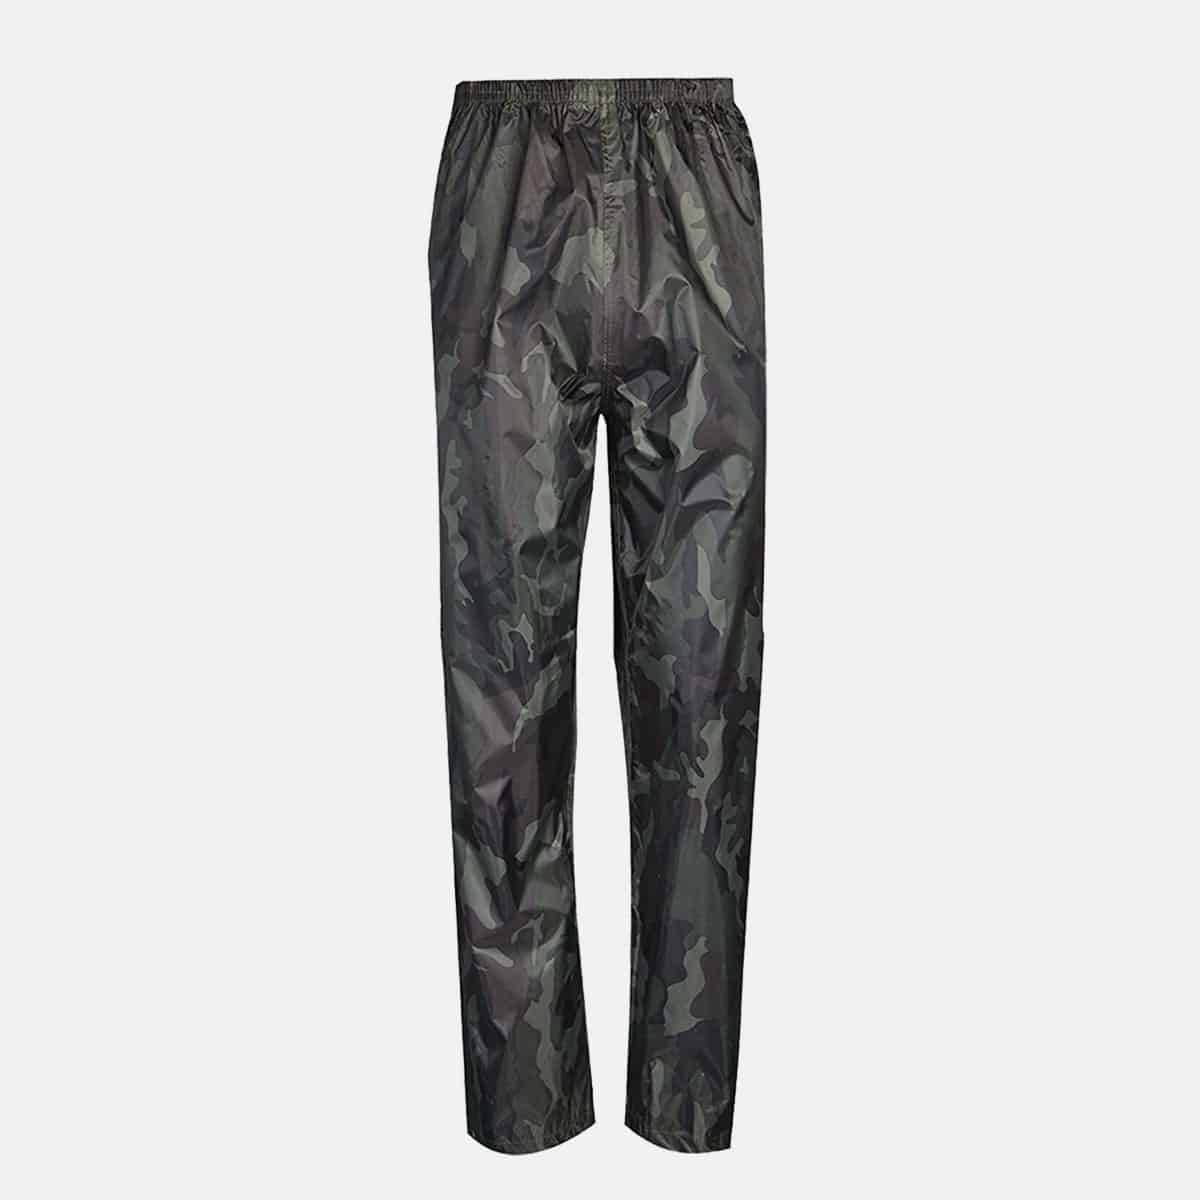 Adults Camouflage Waterproof Over Trousers by Baum Country